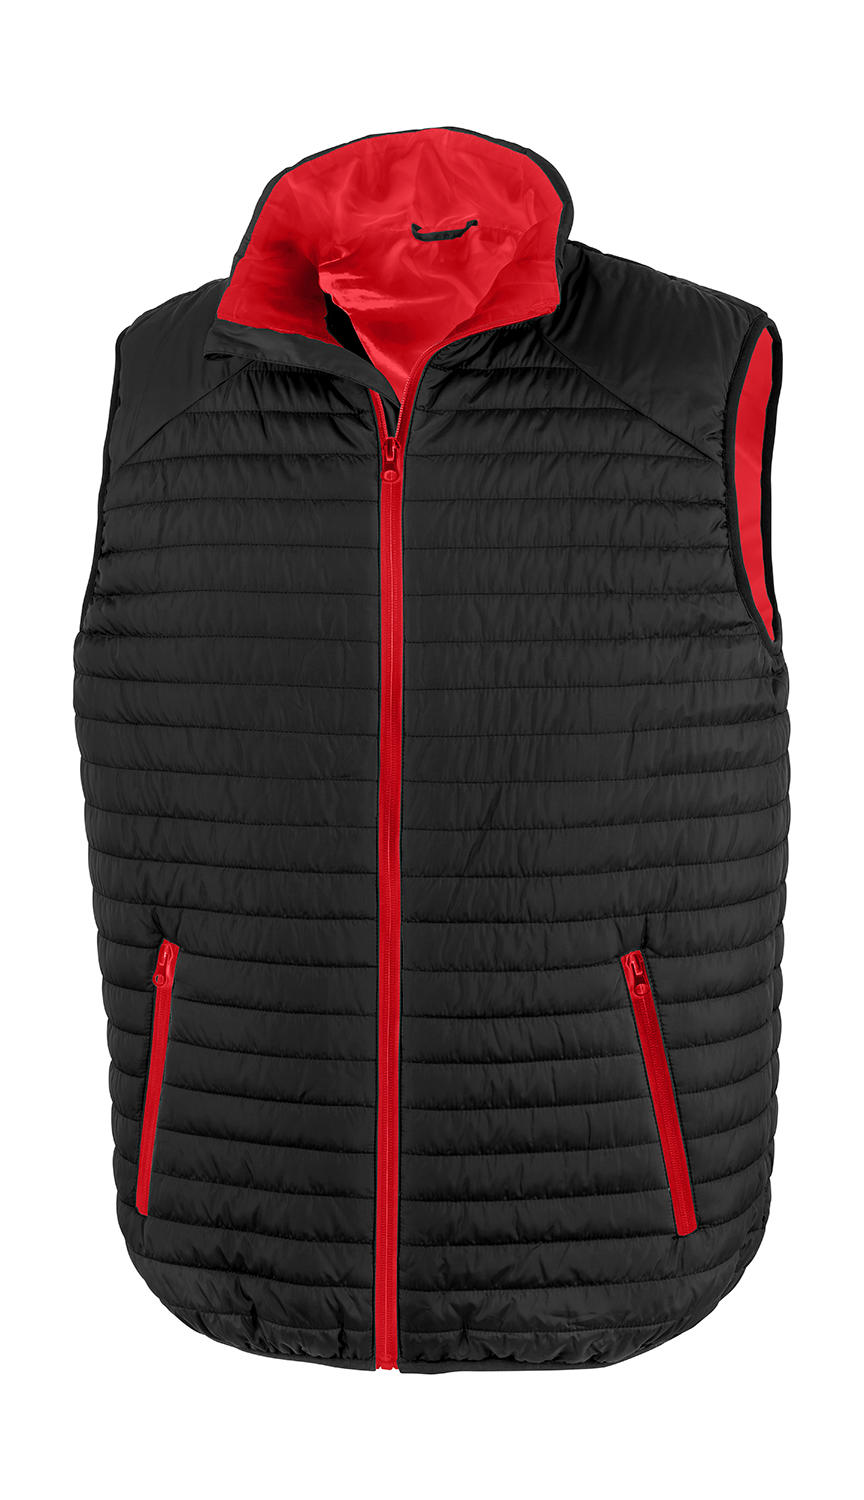  Thermoquilt Gilet in Farbe Black/Red